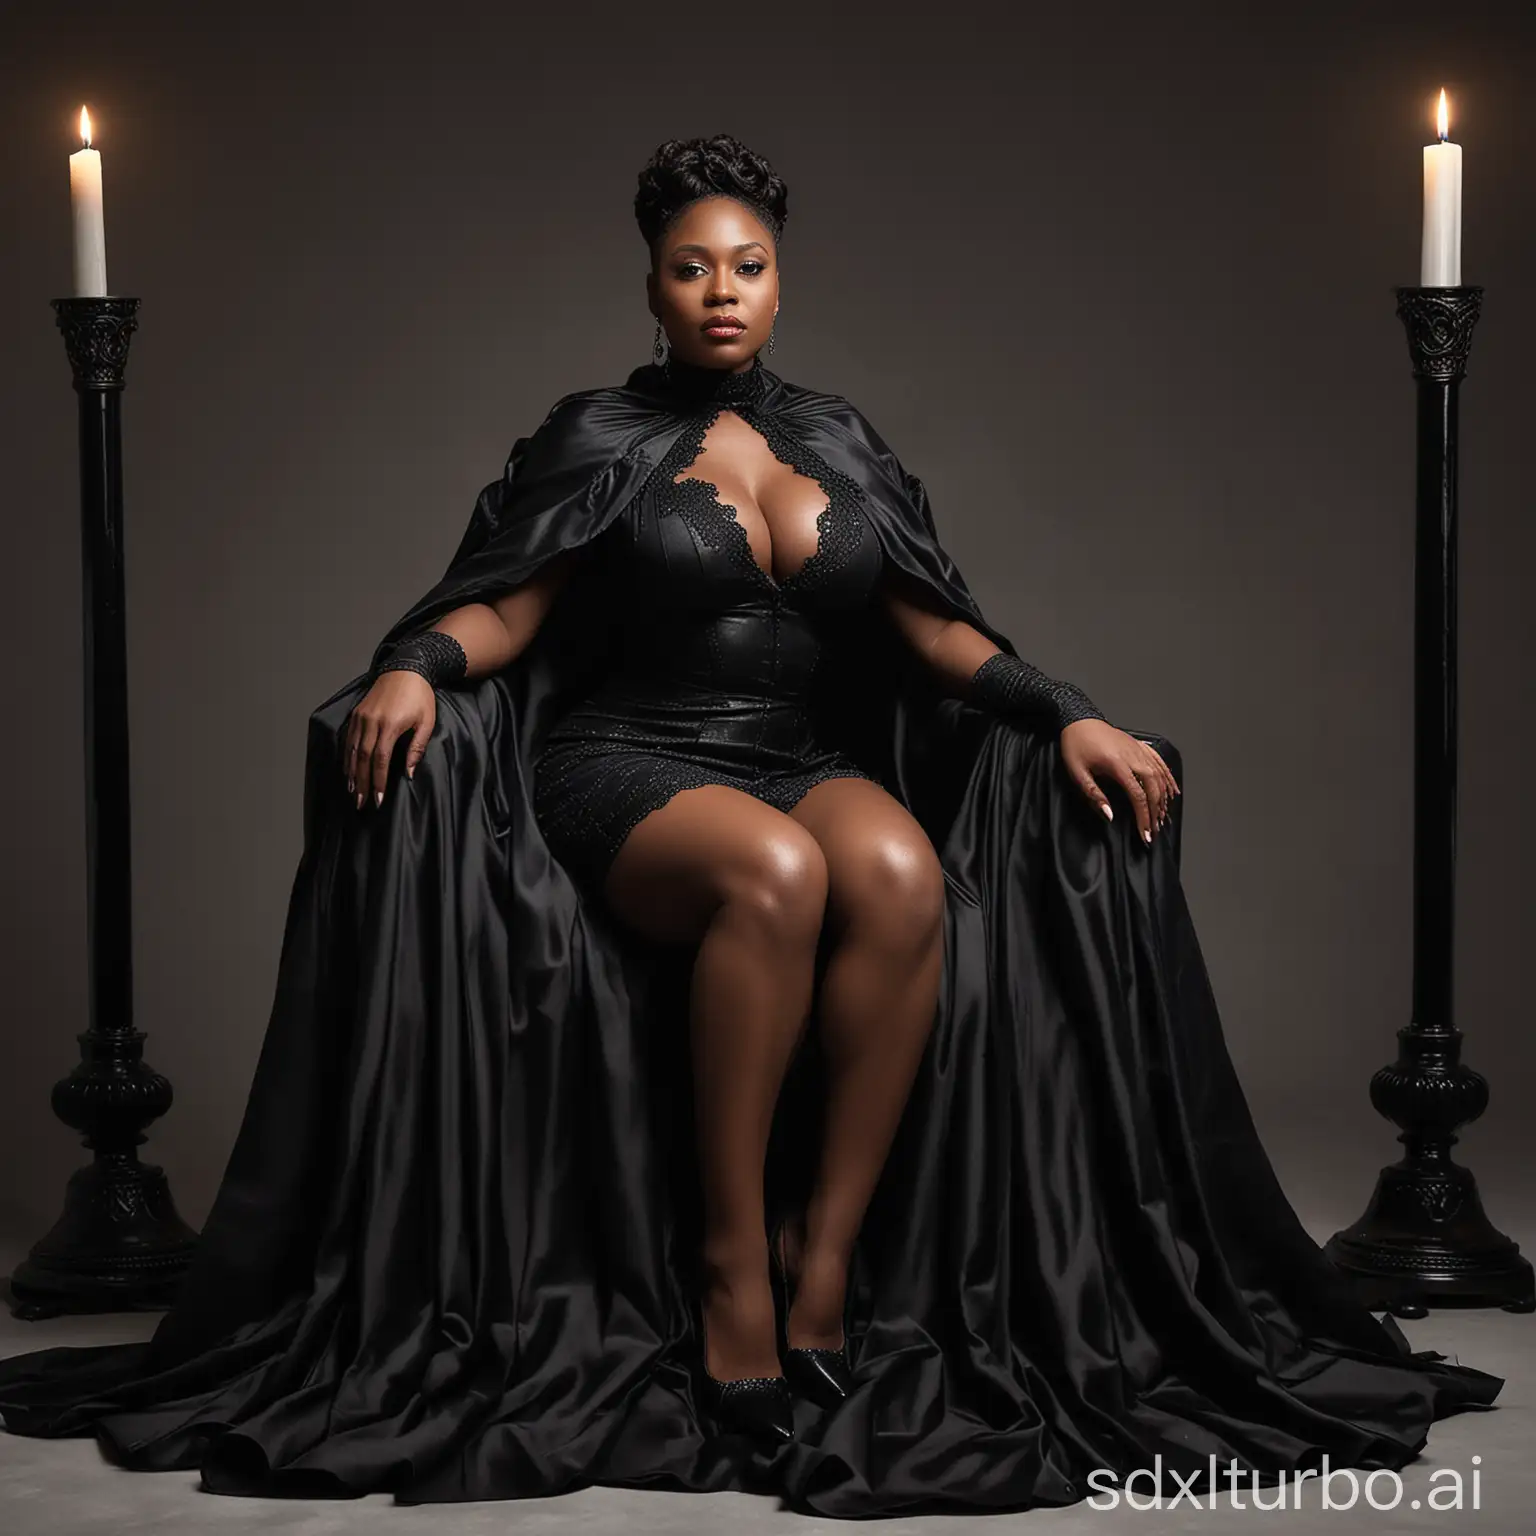 A stunning photograph of a powerful and majestic busty black woman sitting gracefully on a luxurious black throne. She exudes confidence and command, dressed in a mesmerizing black cape with a high collar, which drapes elegantly over her shoulders. Her sophisticated attire shows her exquisite taste and imposing presence. High heel shoes add a sensual touch to the scene, enhancing its balance and grace. A single candlestick adorned with black candles stands proudly beside her, casting a warm, inviting glow that envelops the scene with an air of mystery and strength. This captivating image is a bold statement of power, confidence and beauty, leaving a lasting impression on all who behold it.